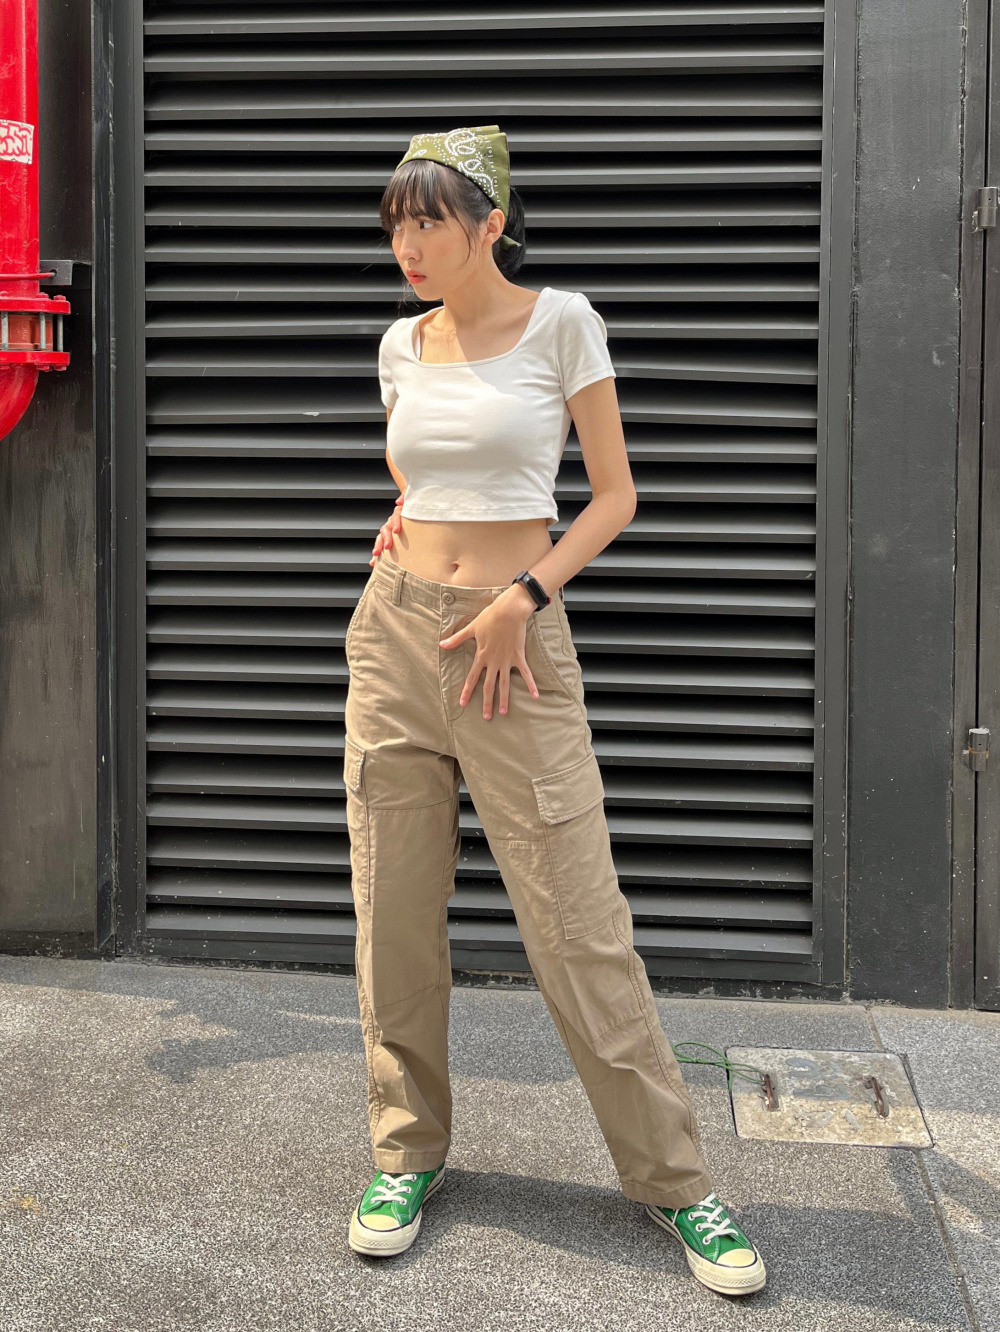 Check styling ideas for「Square Neck Short Sleeve Cropped T-Shirt、Cargo ...